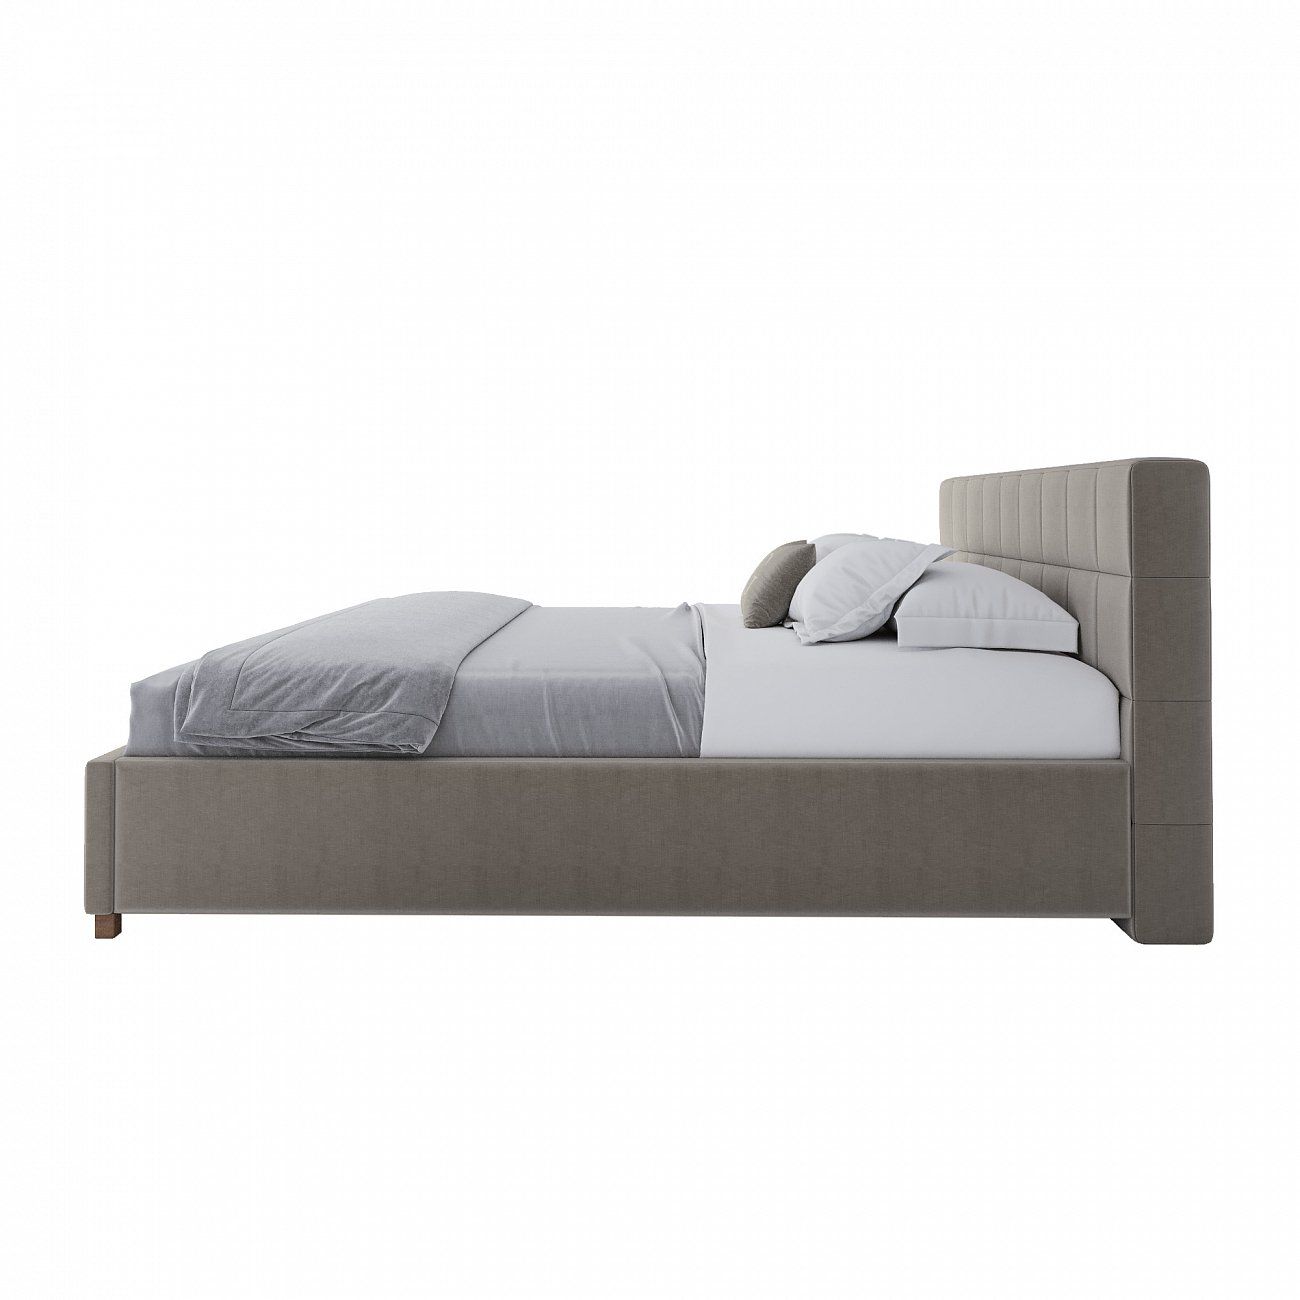 The bed is large 200x200 Wales grey